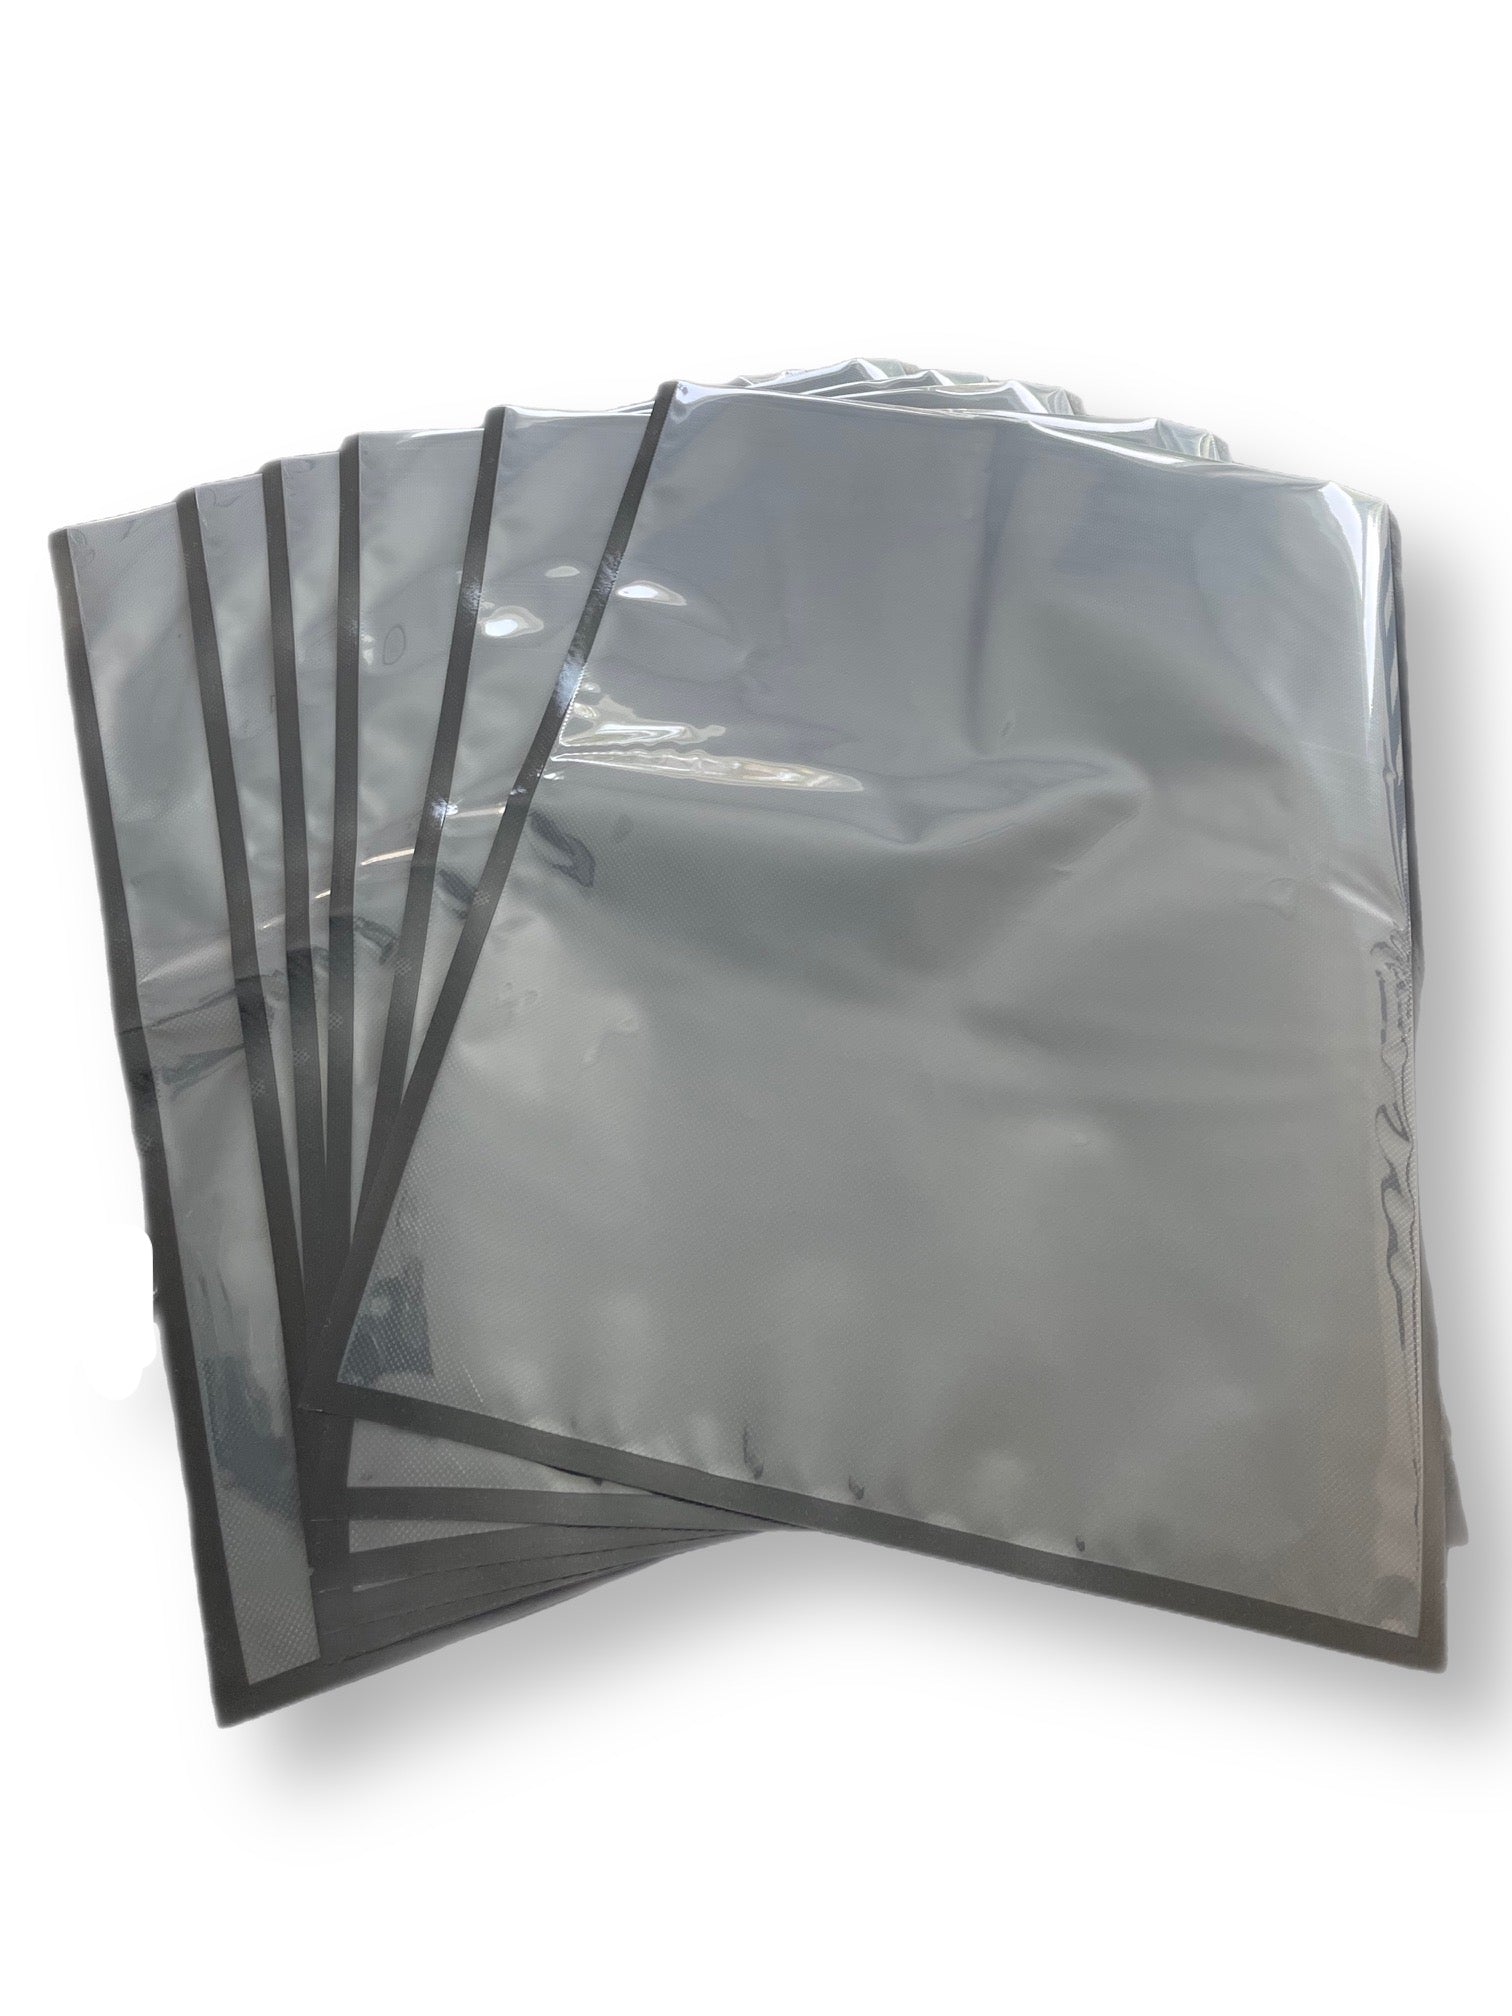 Close-up of the 454 Vacuum Bags, capturing their dual-sided design — one side clear and the other black. These 5 mil thick bags are designed to securely hold up to 1lb of cannabis, ensuring freshness and extended terpene life.